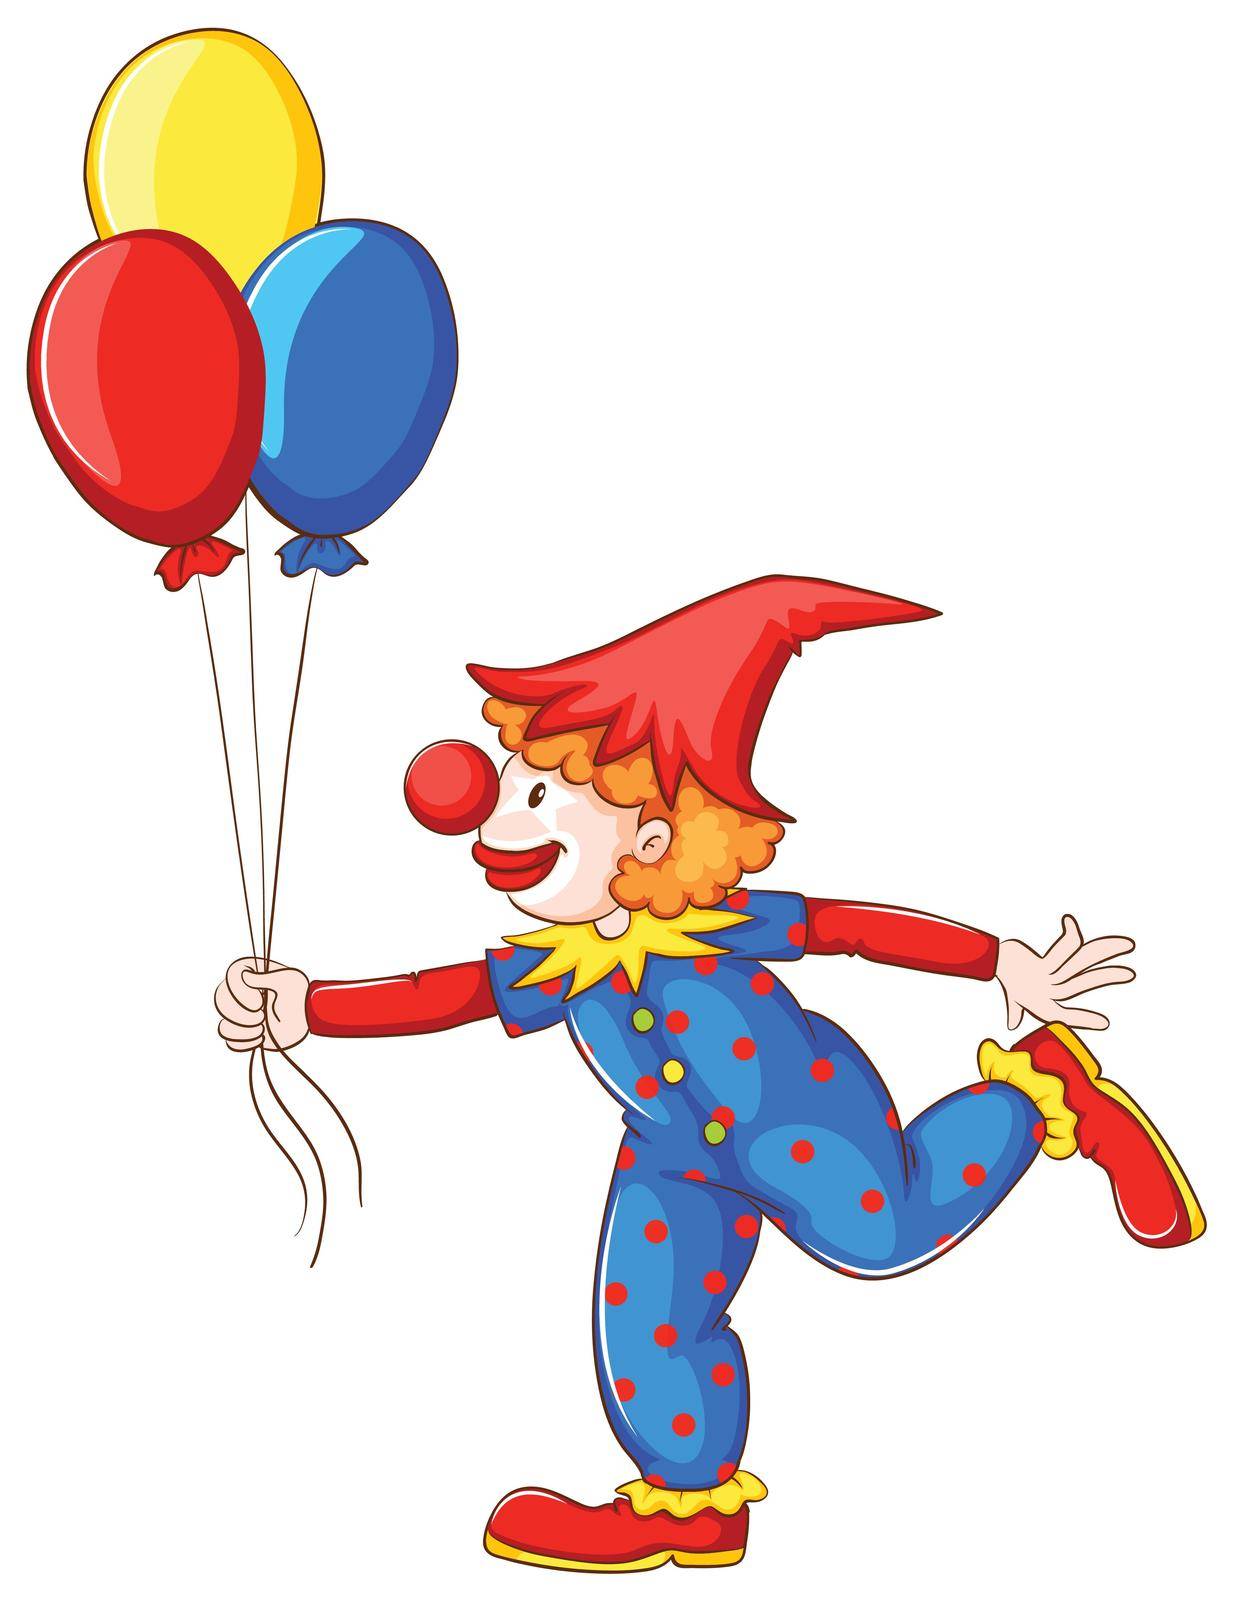 A clown with balloons by iimages